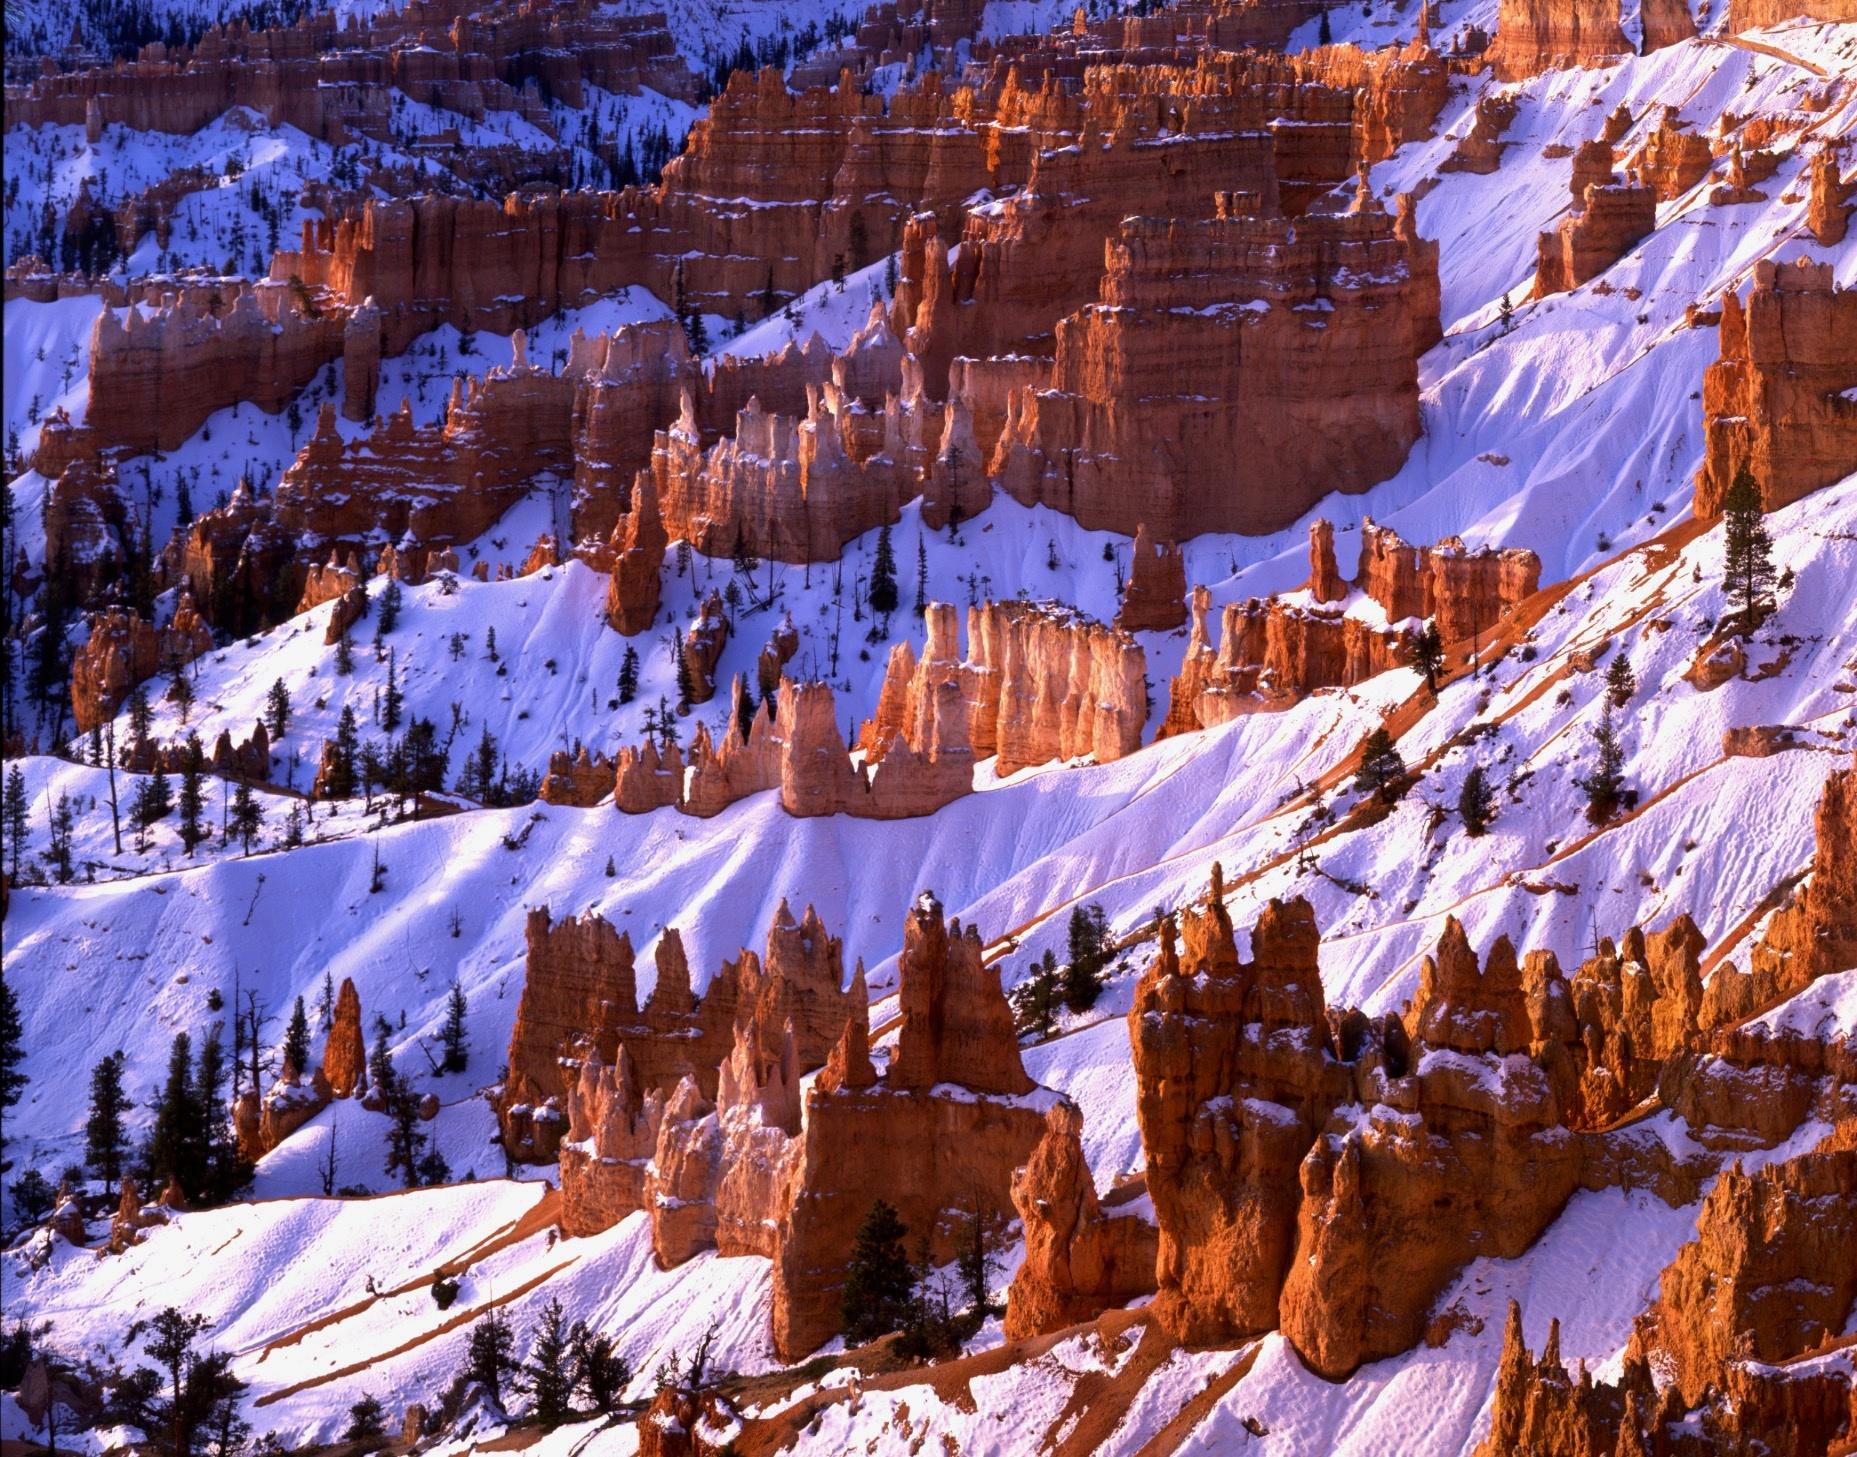 Bryce Canyon National Park in southern Utah.